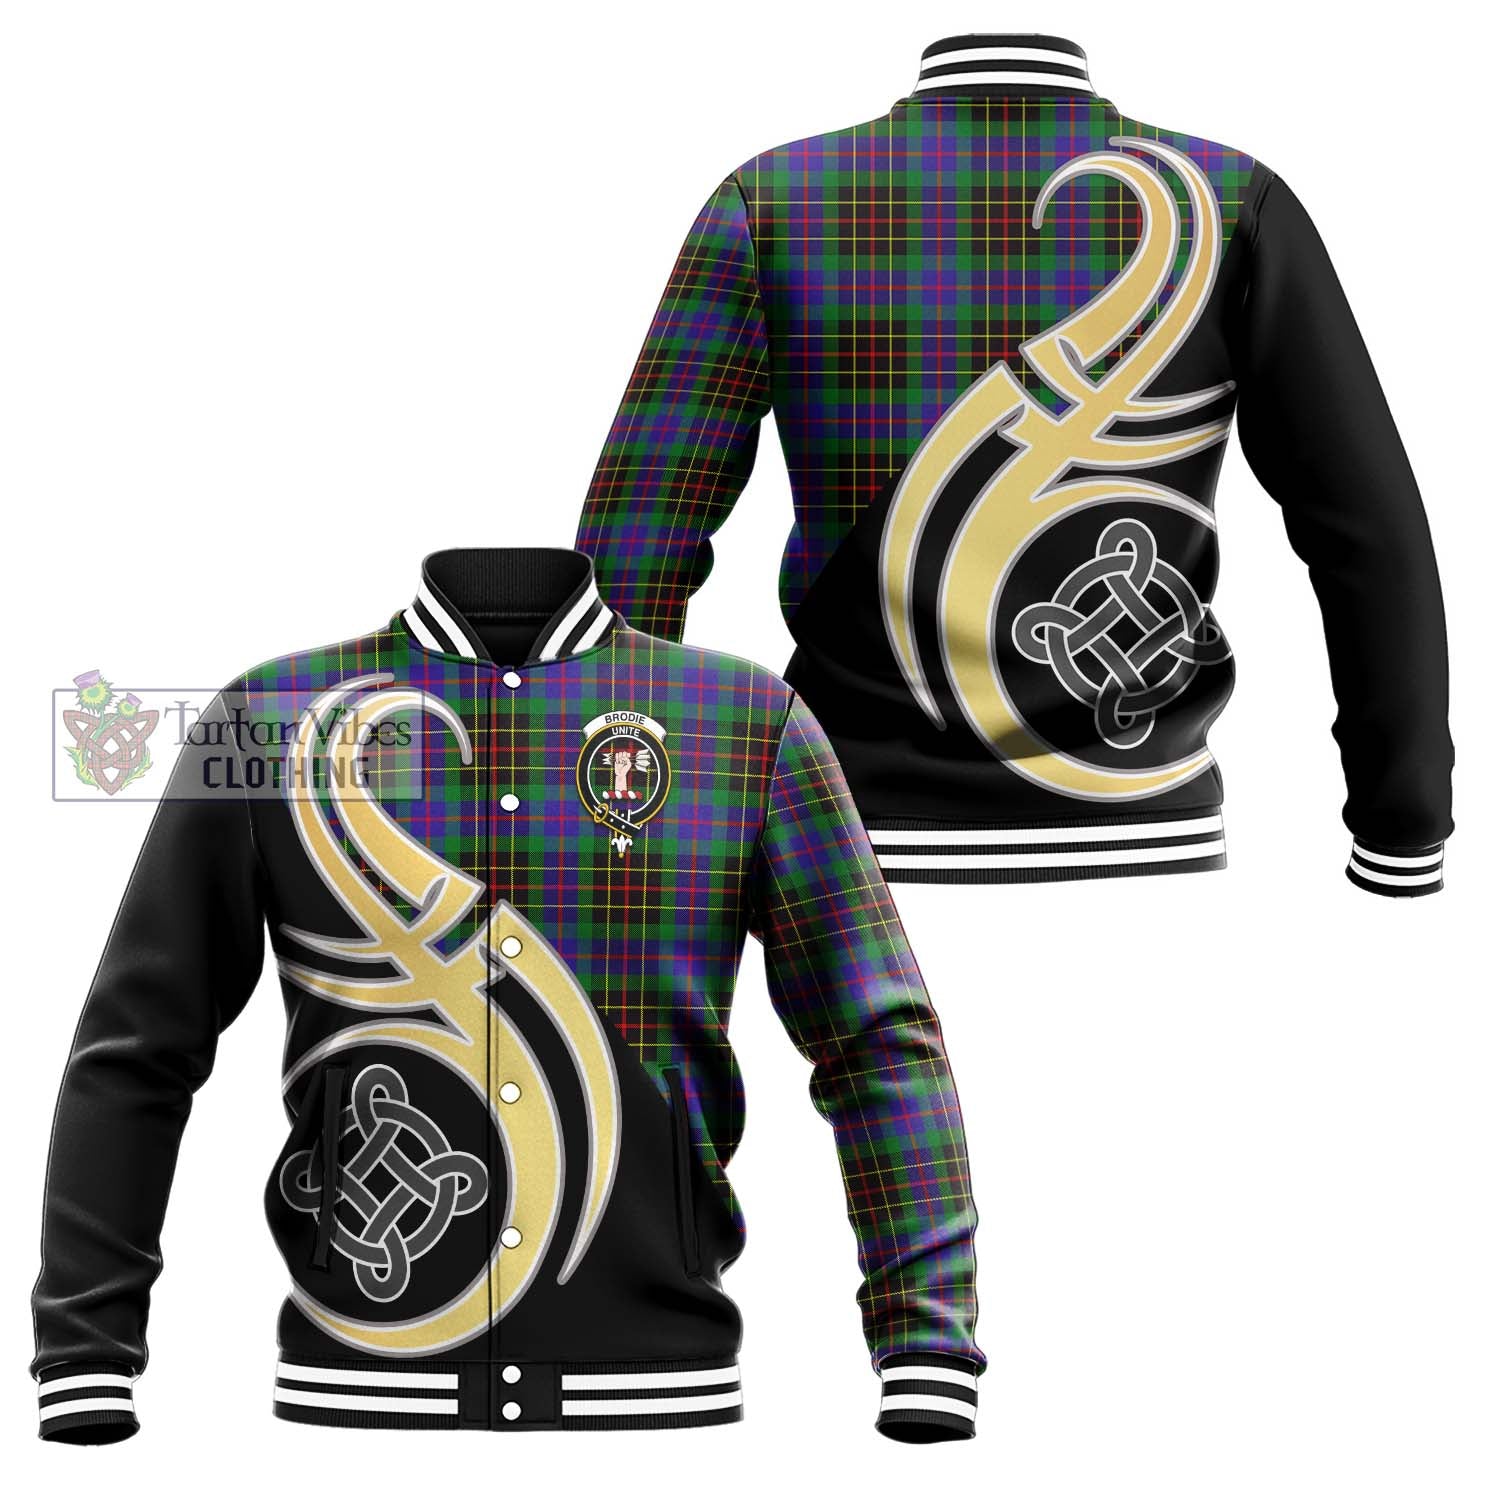 Tartan Vibes Clothing Brodie Hunting Modern Tartan Baseball Jacket with Family Crest and Celtic Symbol Style